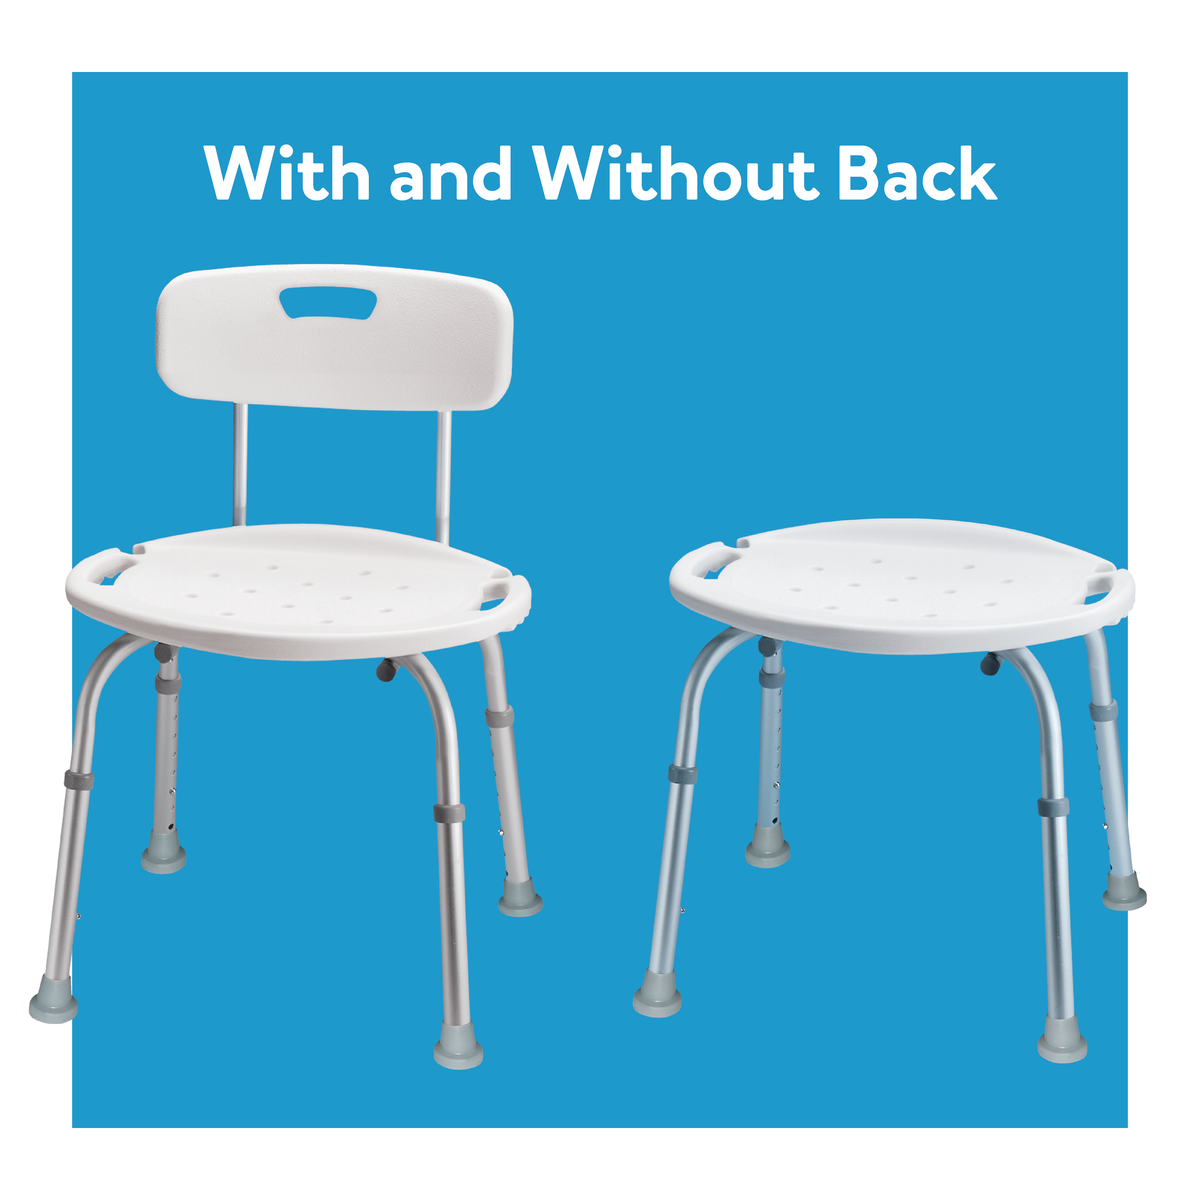 A shower seat with a back next to one without a back. Text, “with and without back”